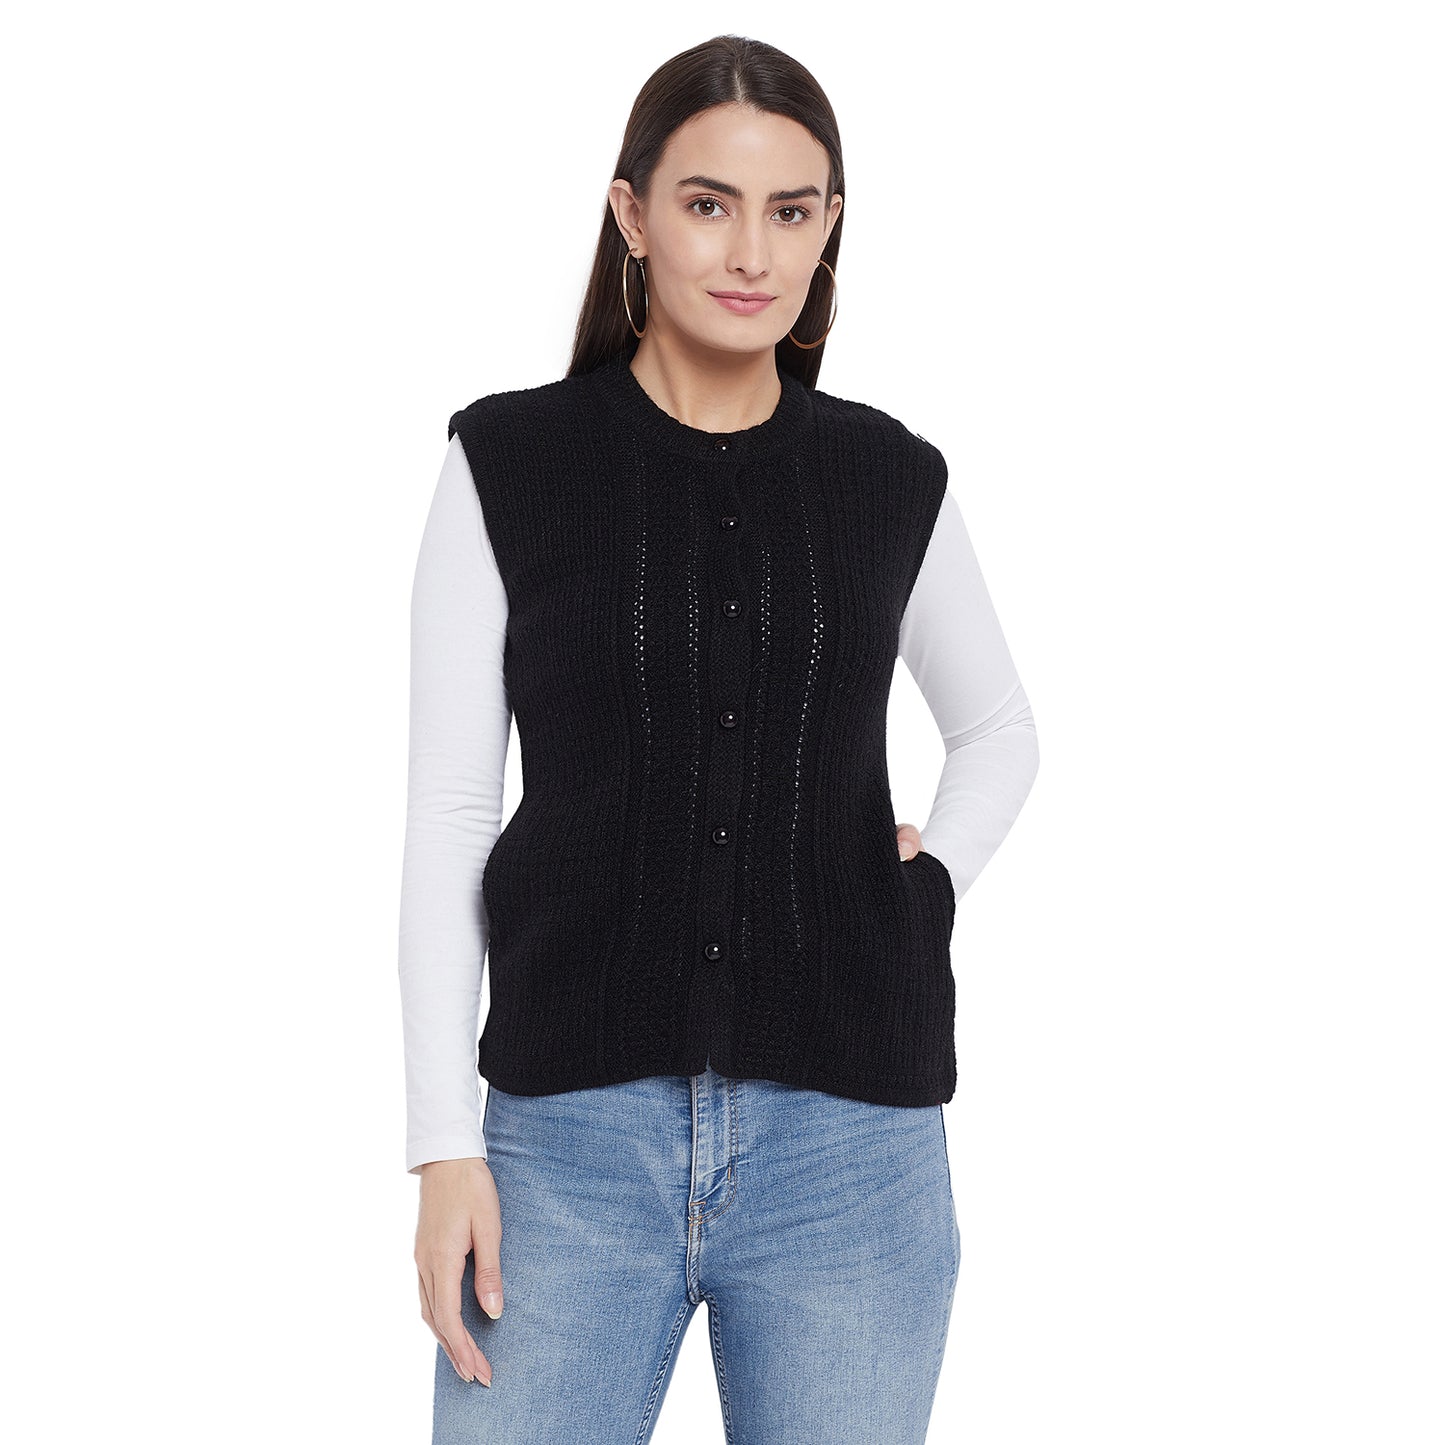 Clapton Acrylic Blend Round Neck Full Sleeve Casual Solid Winter Wear Cardigans For Women Grey